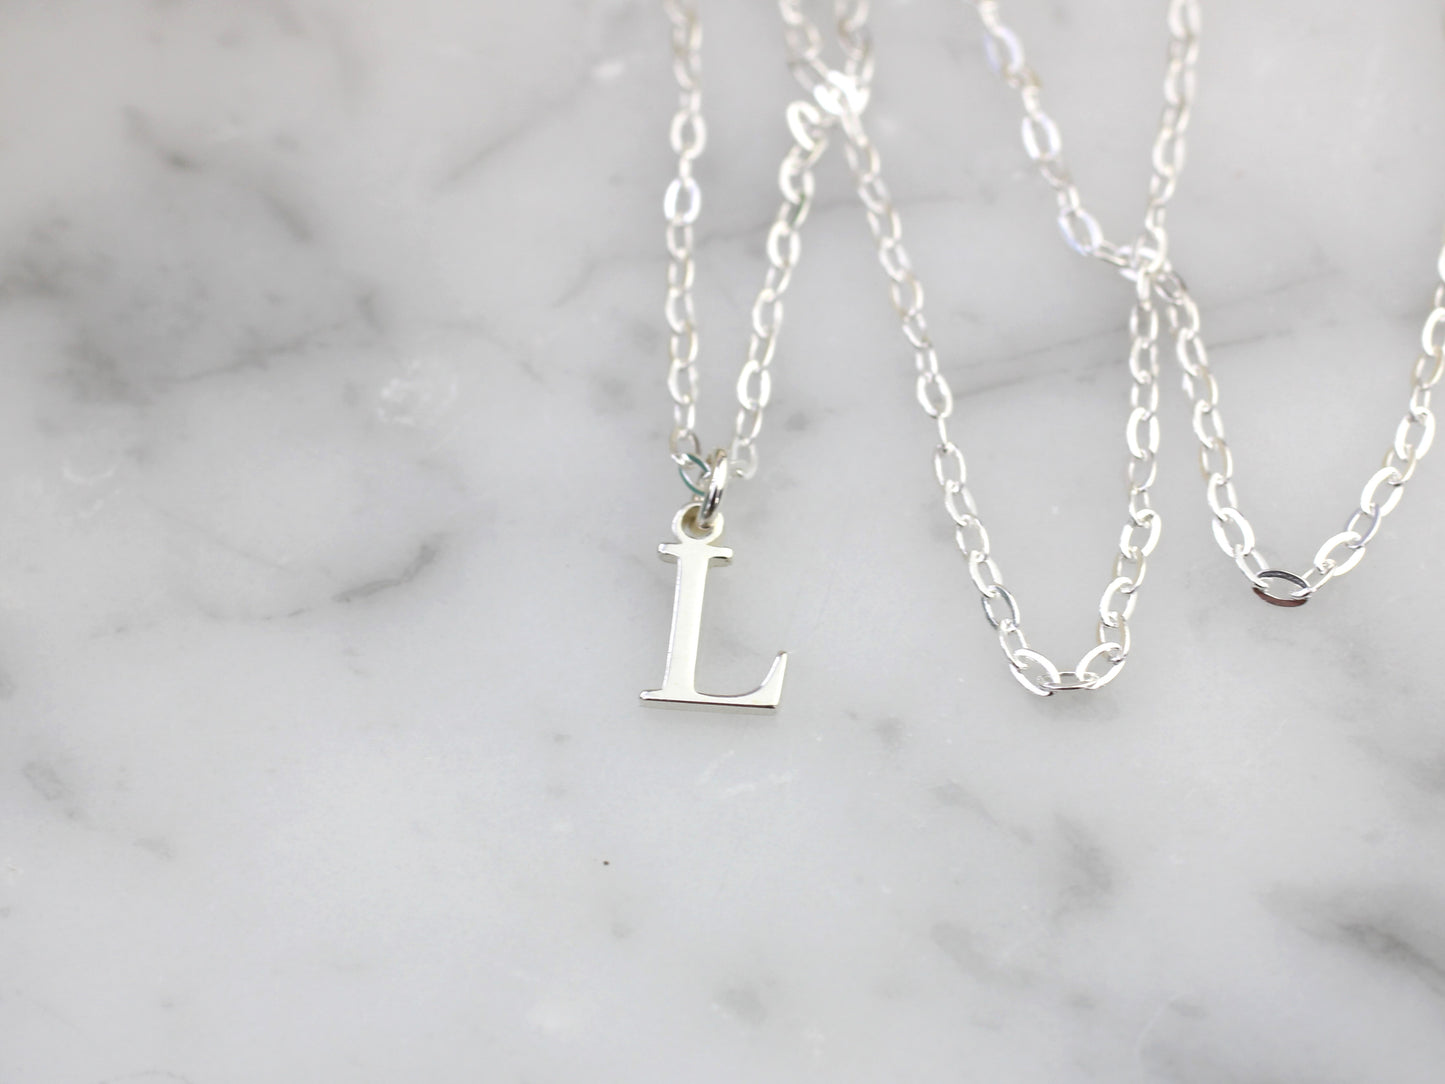 Silver initial necklace.